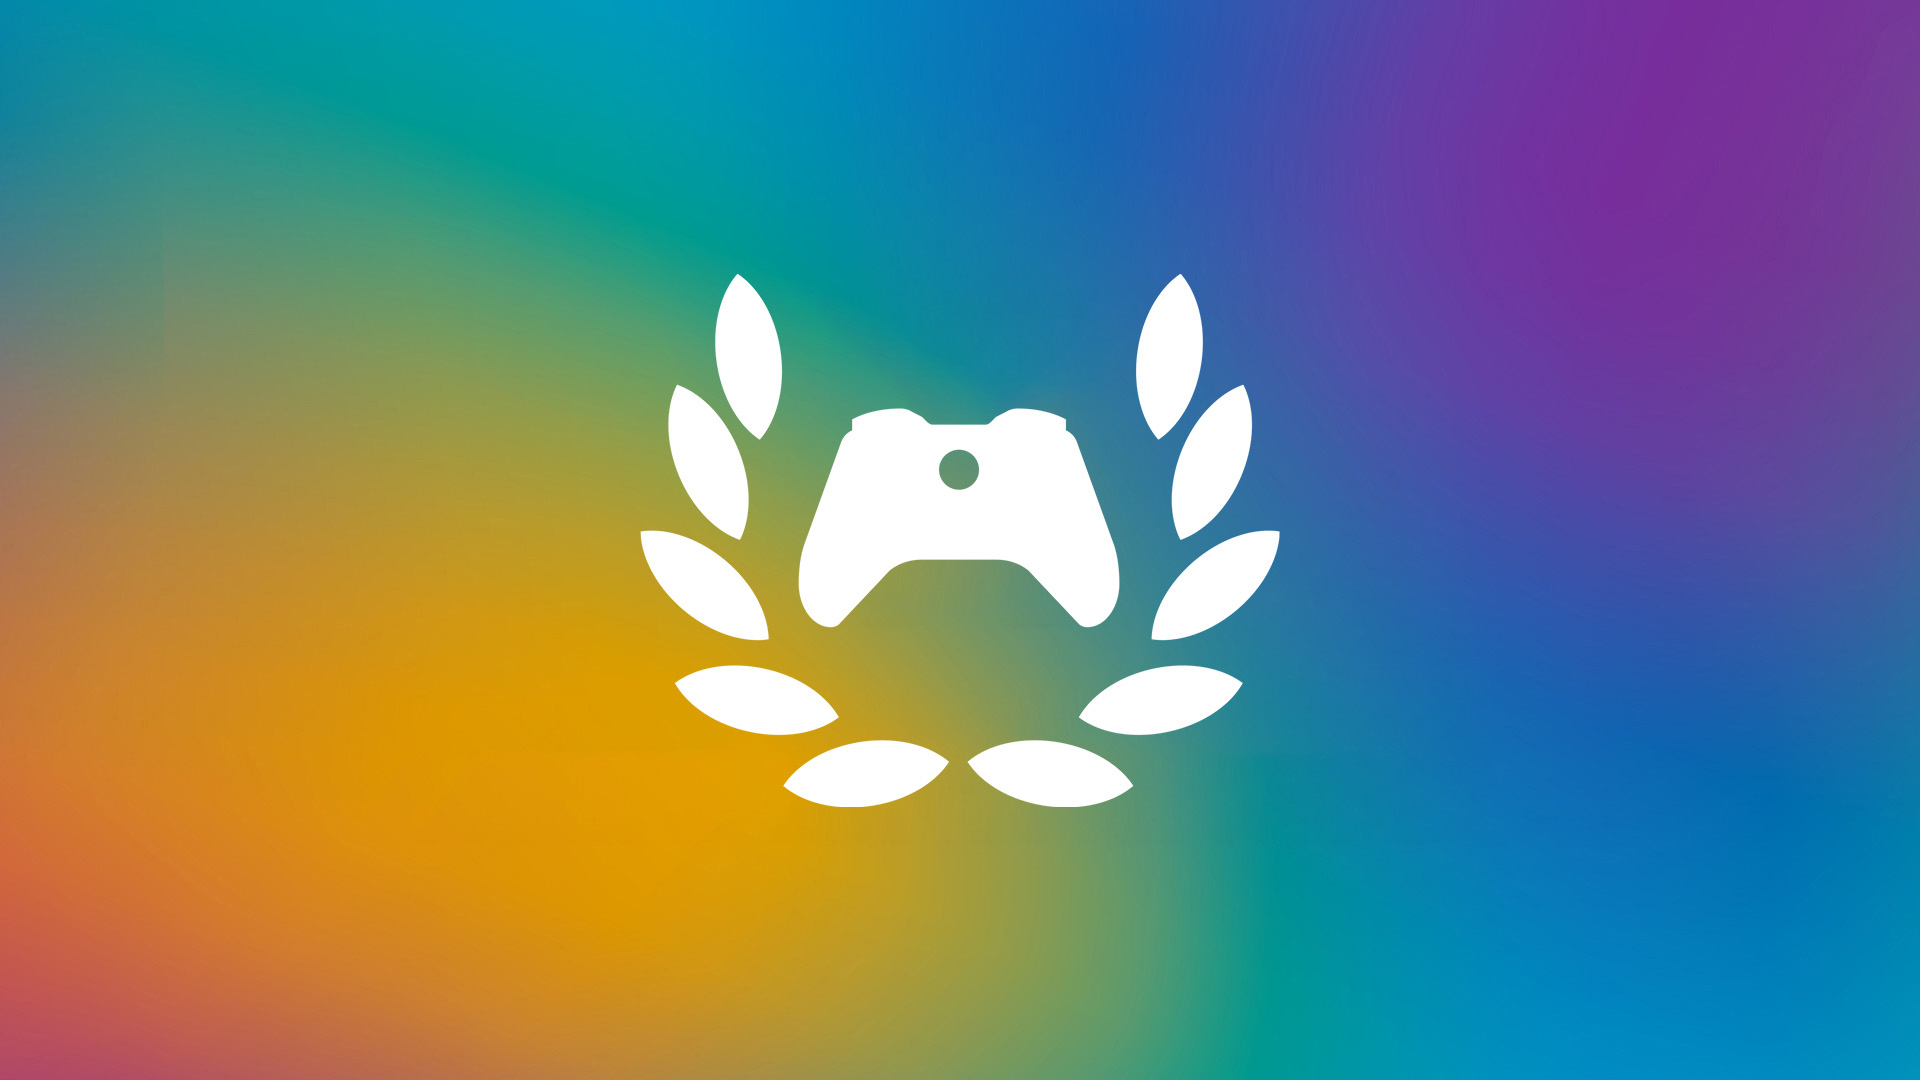 Xbox Ambassadors logo with white controller and laurel leaves set on a blurred rainbow background.